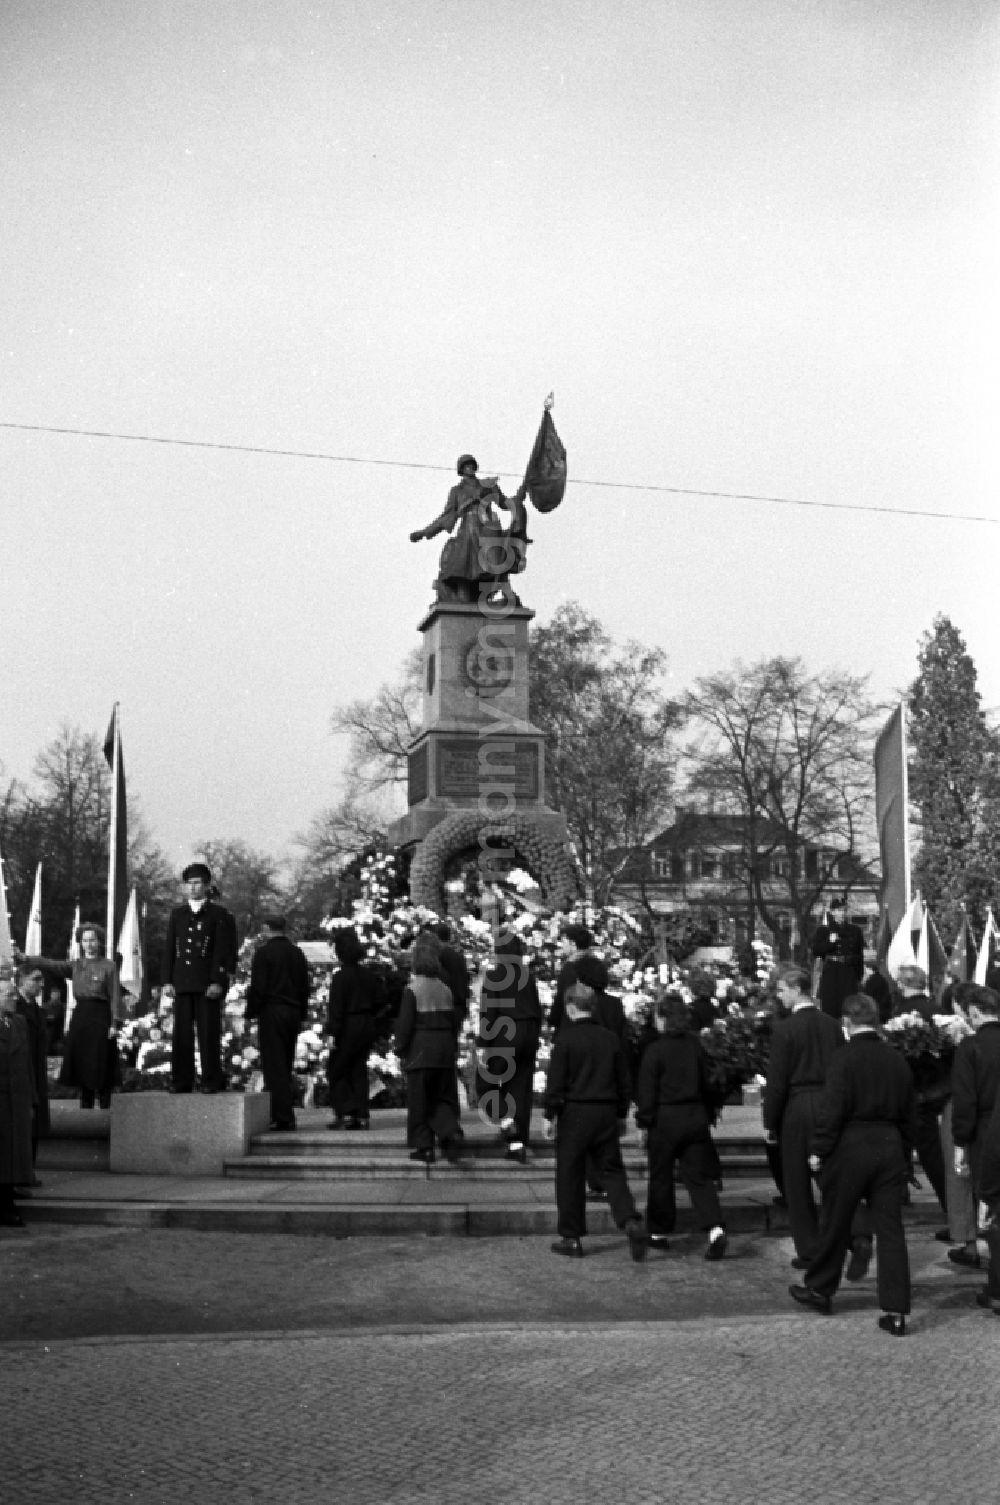 GDR image archive: Dresden - Participants in a commemoration event at the monument Memorial of the Red Army, the Soviet memorial on the occasion of the 34th anniversary of the Great Socialist October Revolution at Olbrichtplatz in the district Neustadt in Dresden in the state of Saxony on the territory of the former GDR, German Democratic Republic